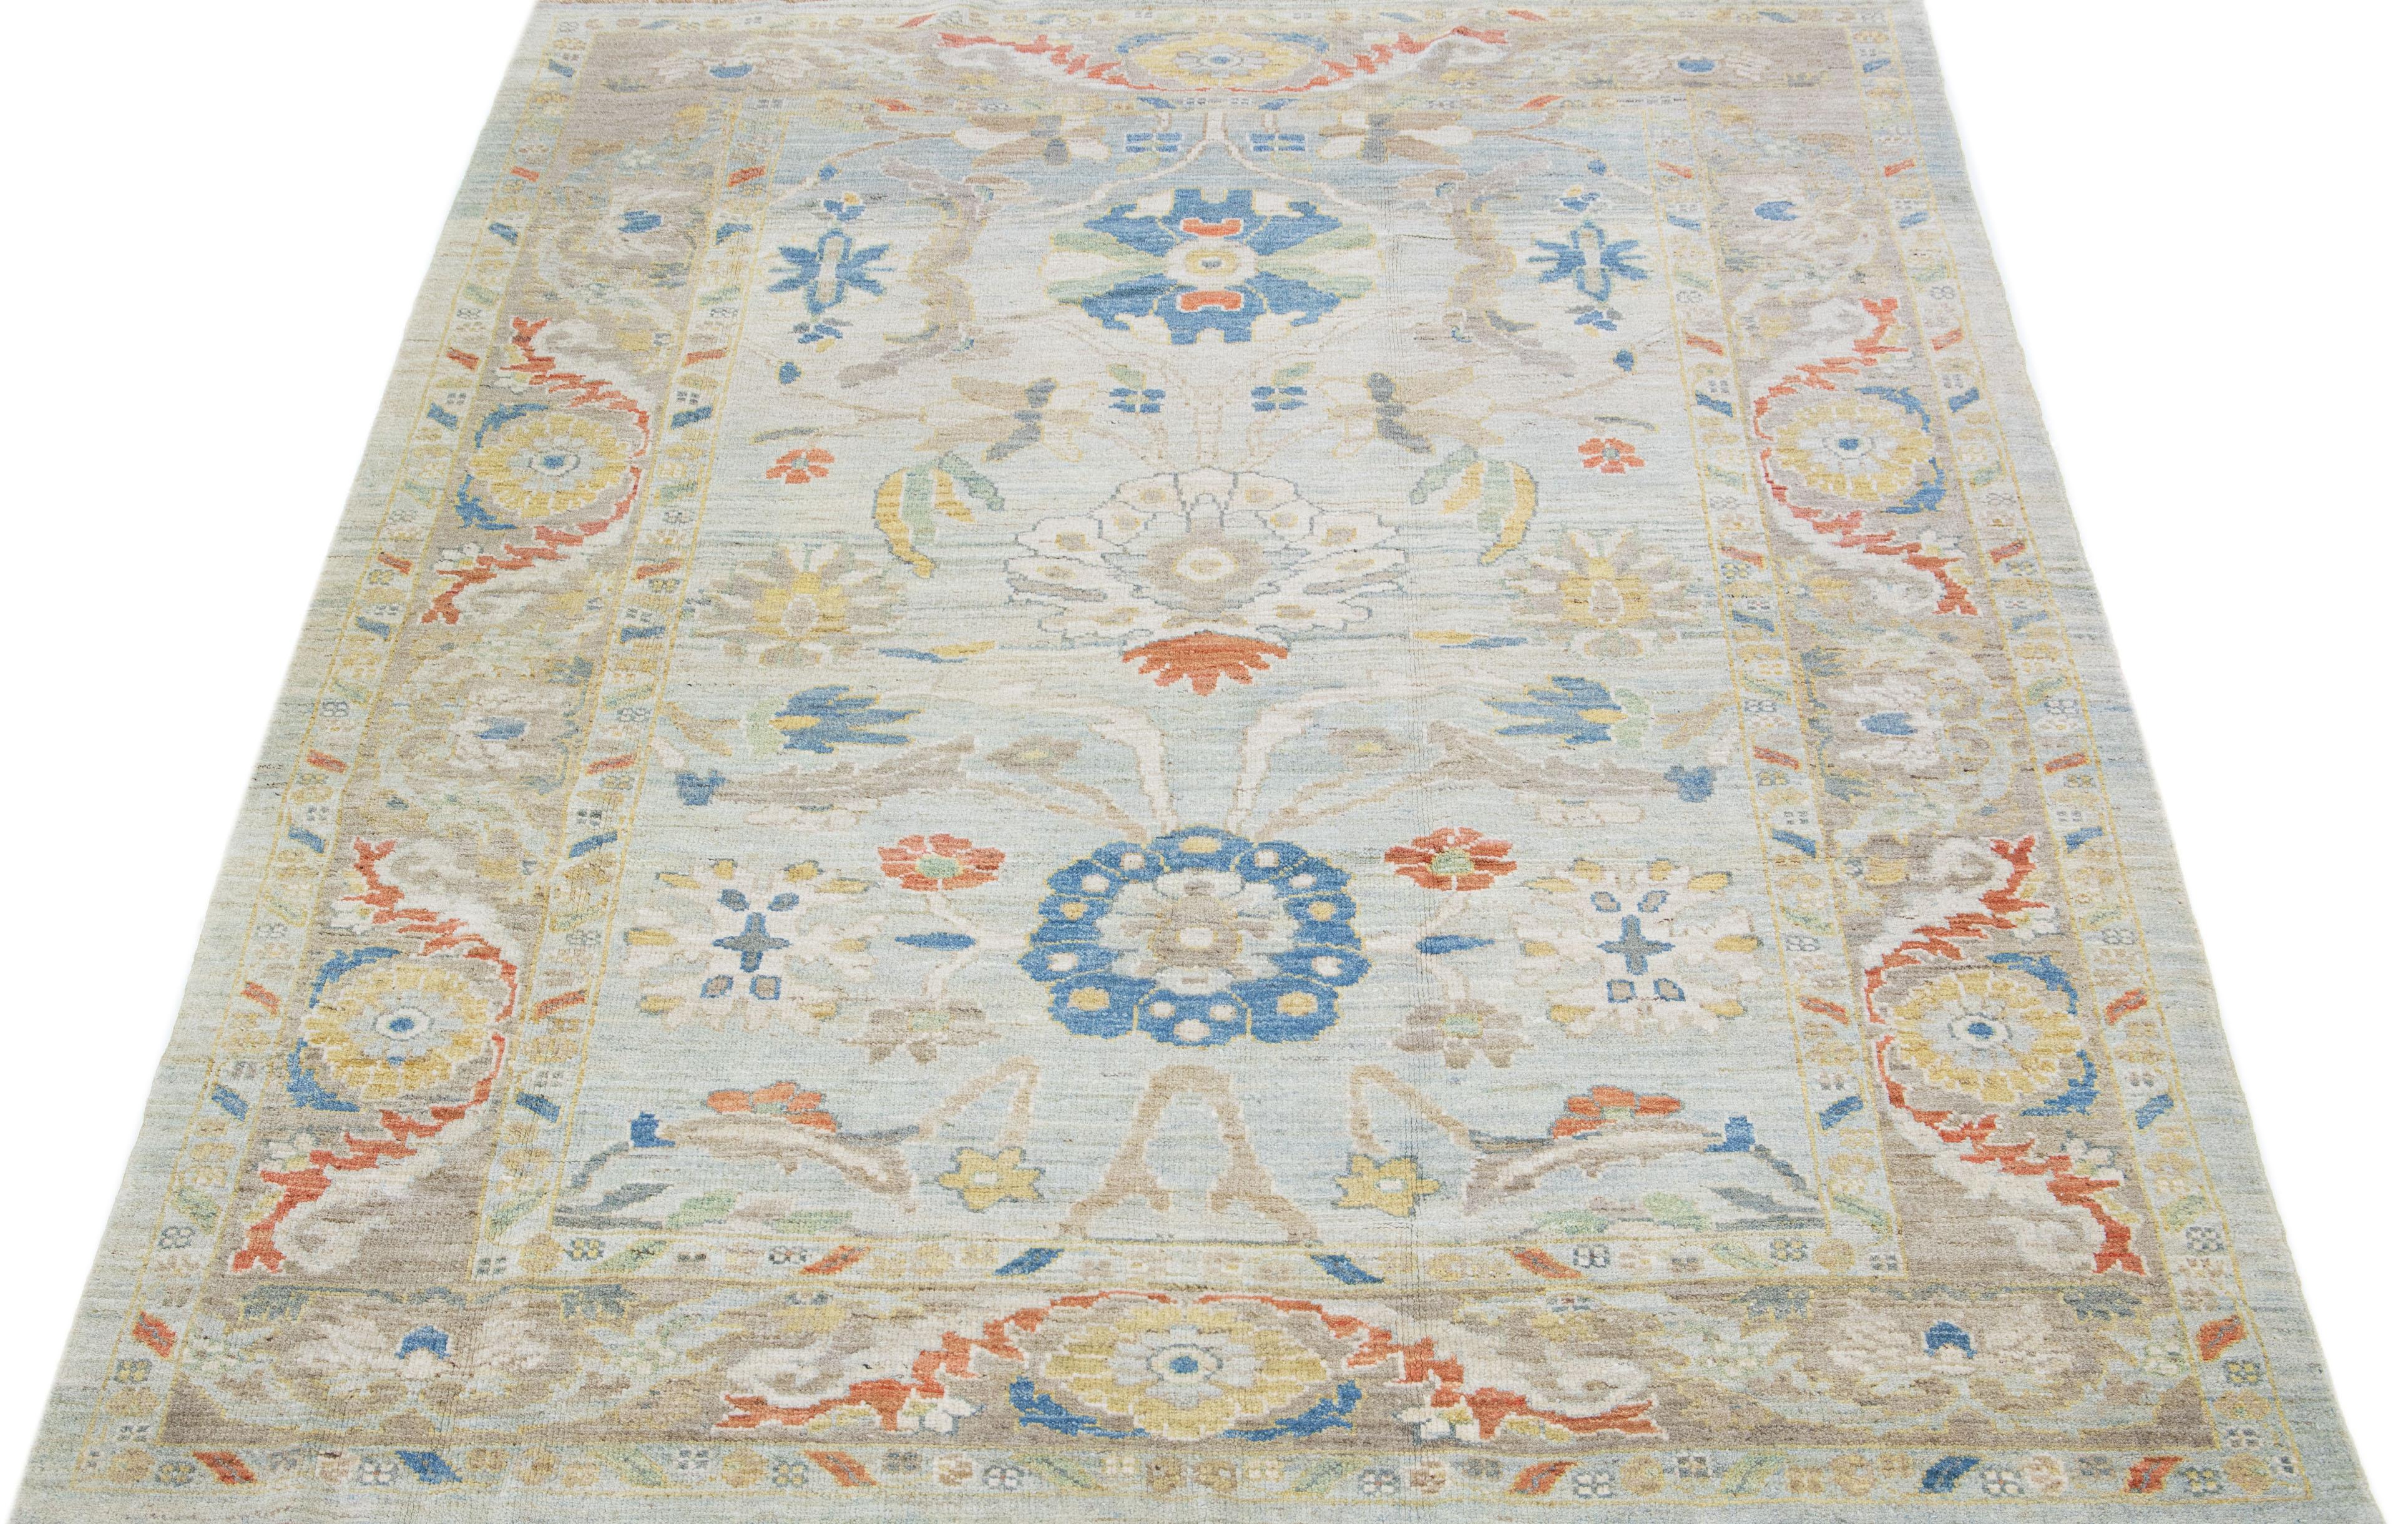 Beautiful modern Sultanabad hand knotted wool rug with a light blue color field. This rug has a beige-designed frame with multicolor accents in a gorgeous all-over floral design.

This rug measures: 6'10